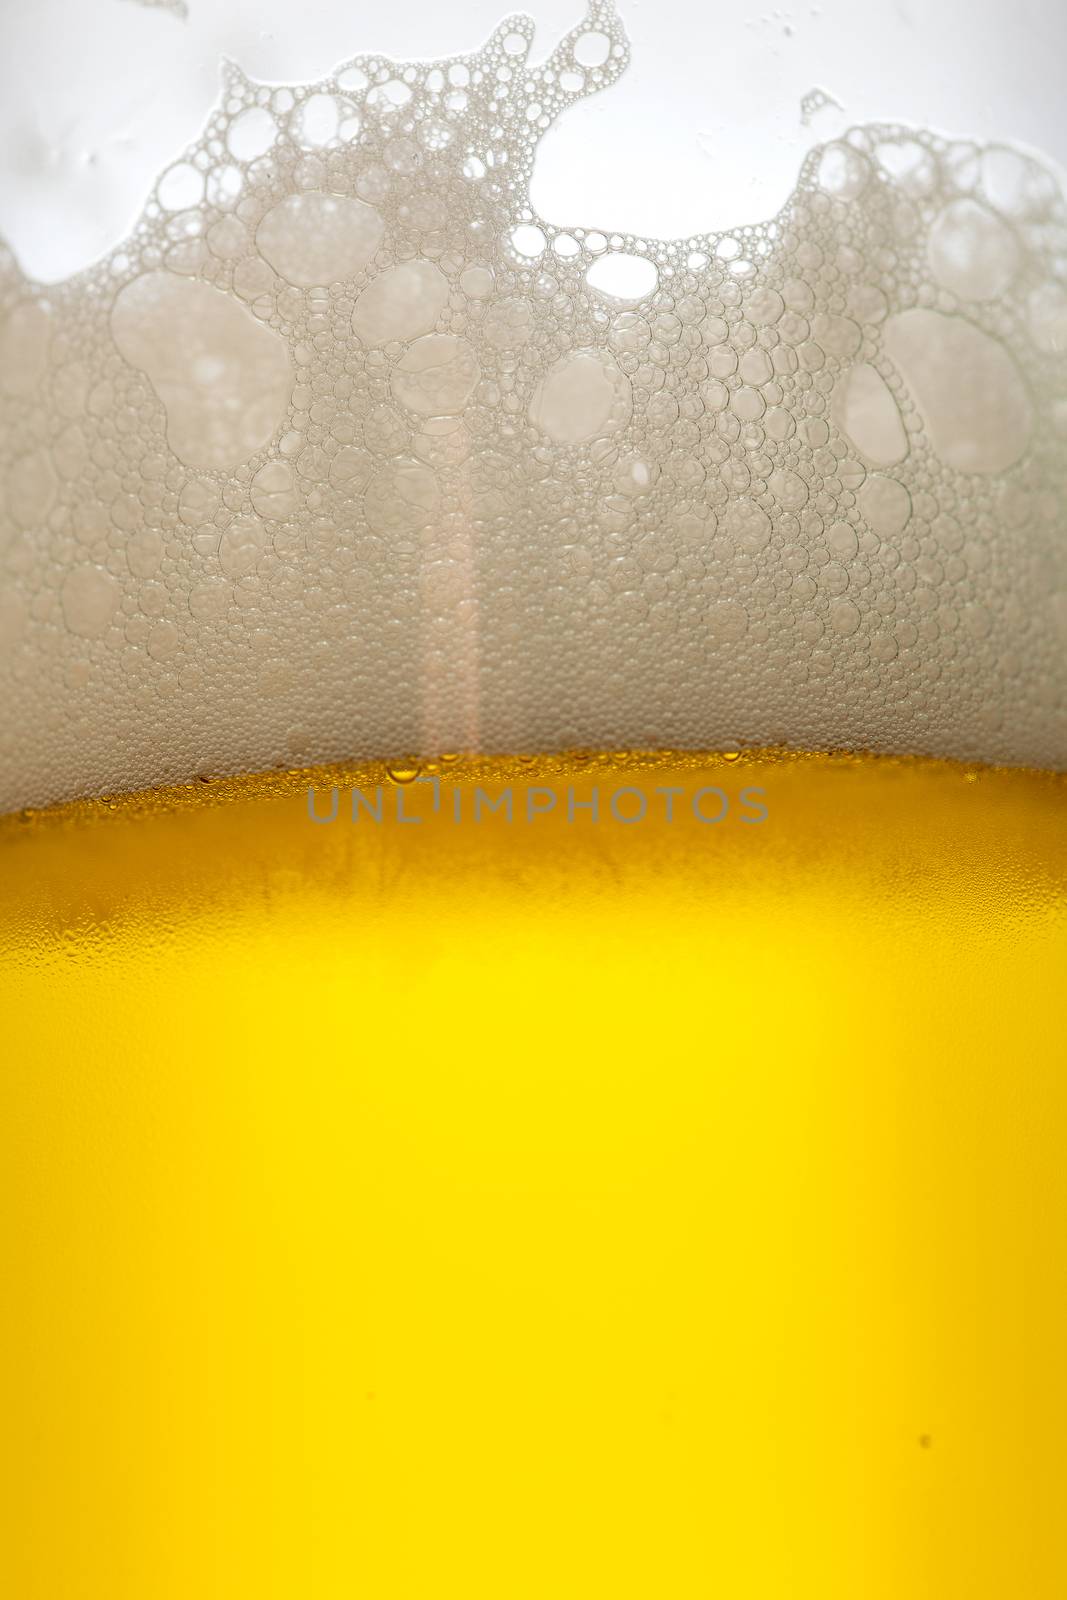 Misted glass of cold drink with foam, close-up